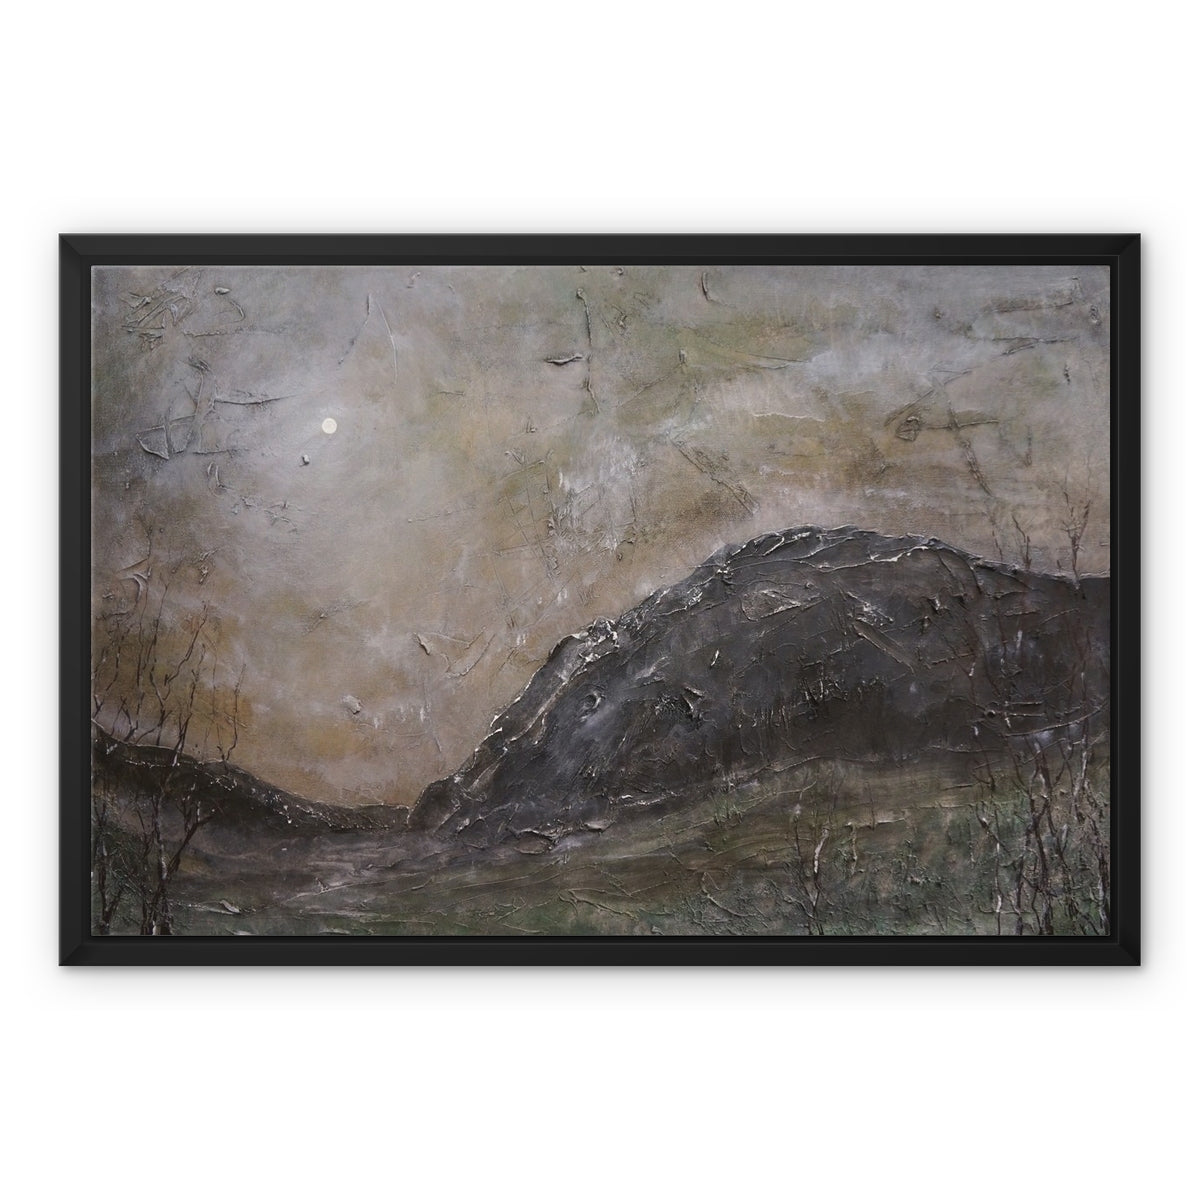 Glen Nevis Moonlight Painting | Framed Canvas-Floating Framed Canvas Prints-Scottish Lochs & Mountains Art Gallery-24"x18"-Black Frame-White Wrap-Paintings, Prints, Homeware, Art Gifts From Scotland By Scottish Artist Kevin Hunter